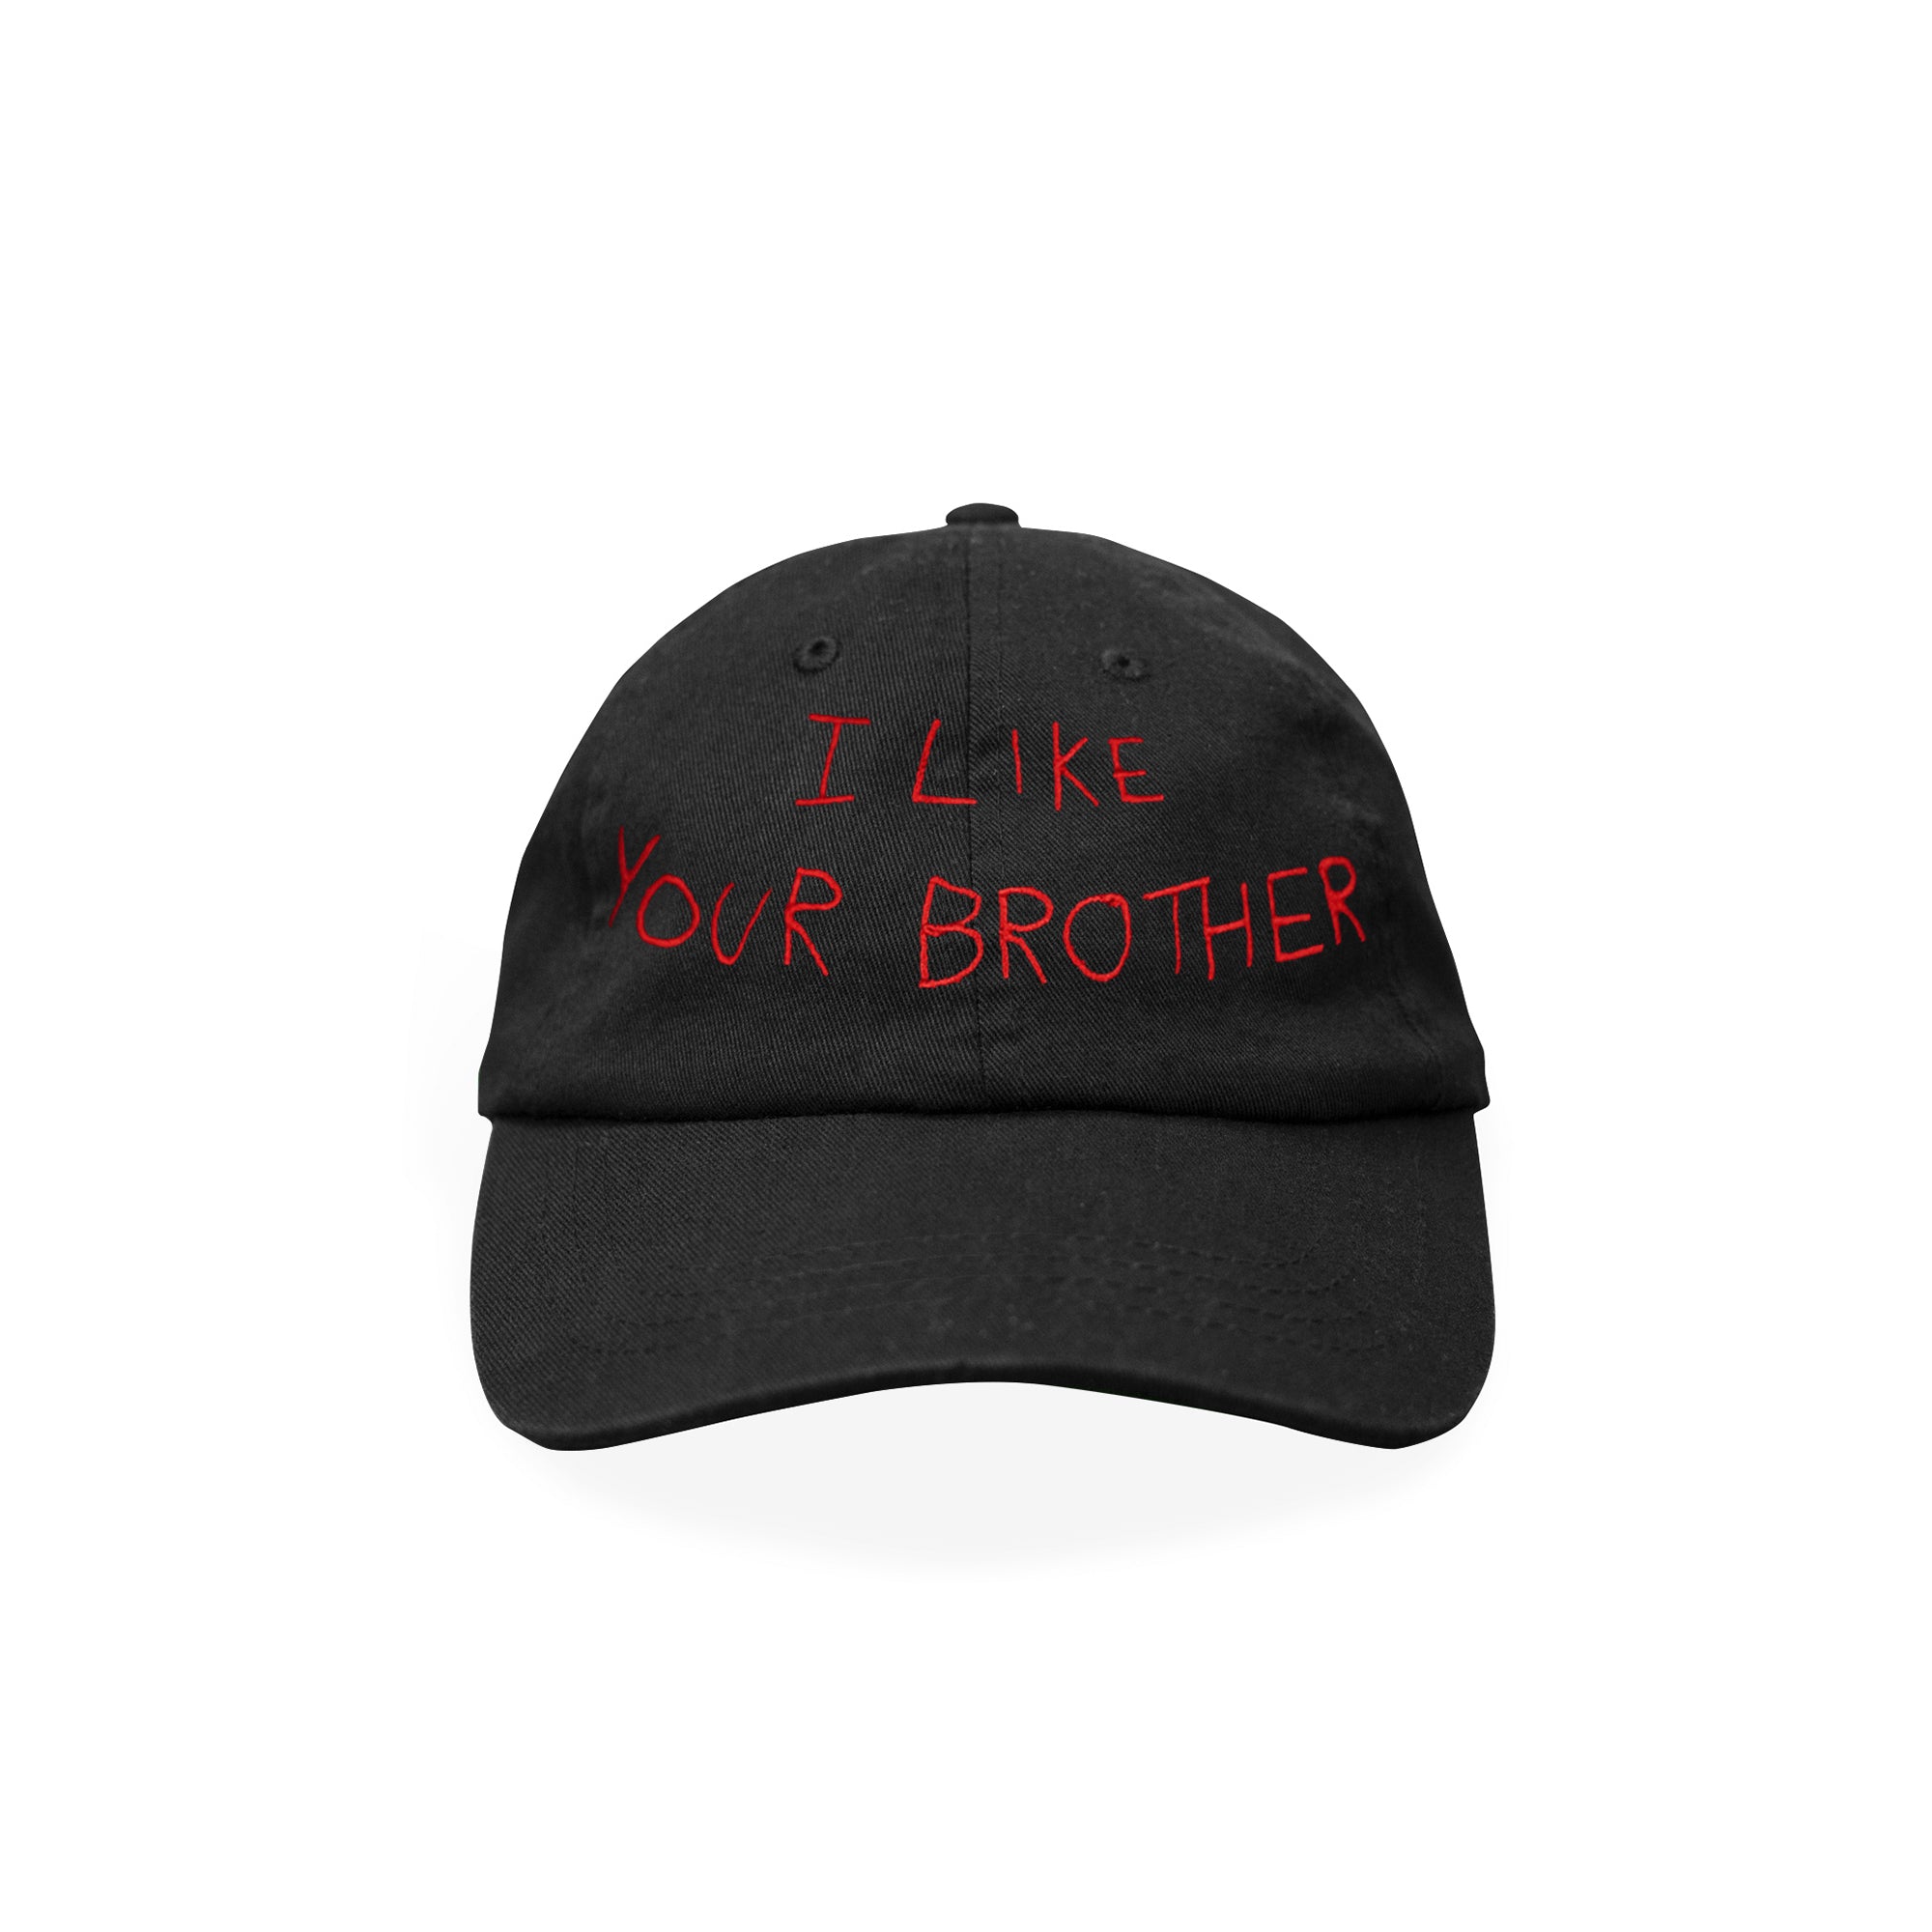 I like your brother